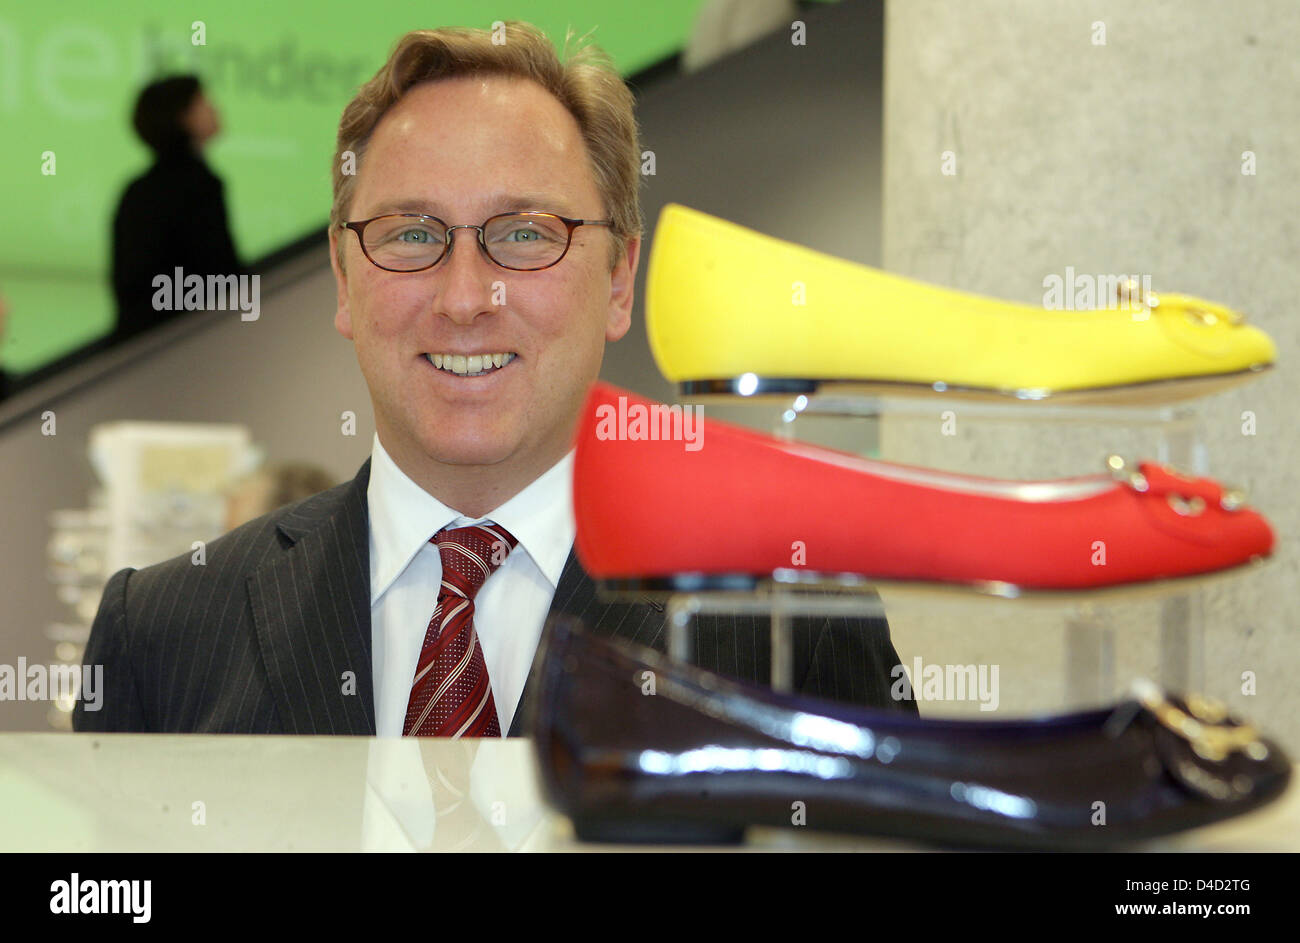 The CEO of shoe group Deichmann, Heinrich Deichmann is pictured in a Deichmann store in Essen, Germany, 10 March 2008. Deichmann announced the company's business figures at the balance press conference.